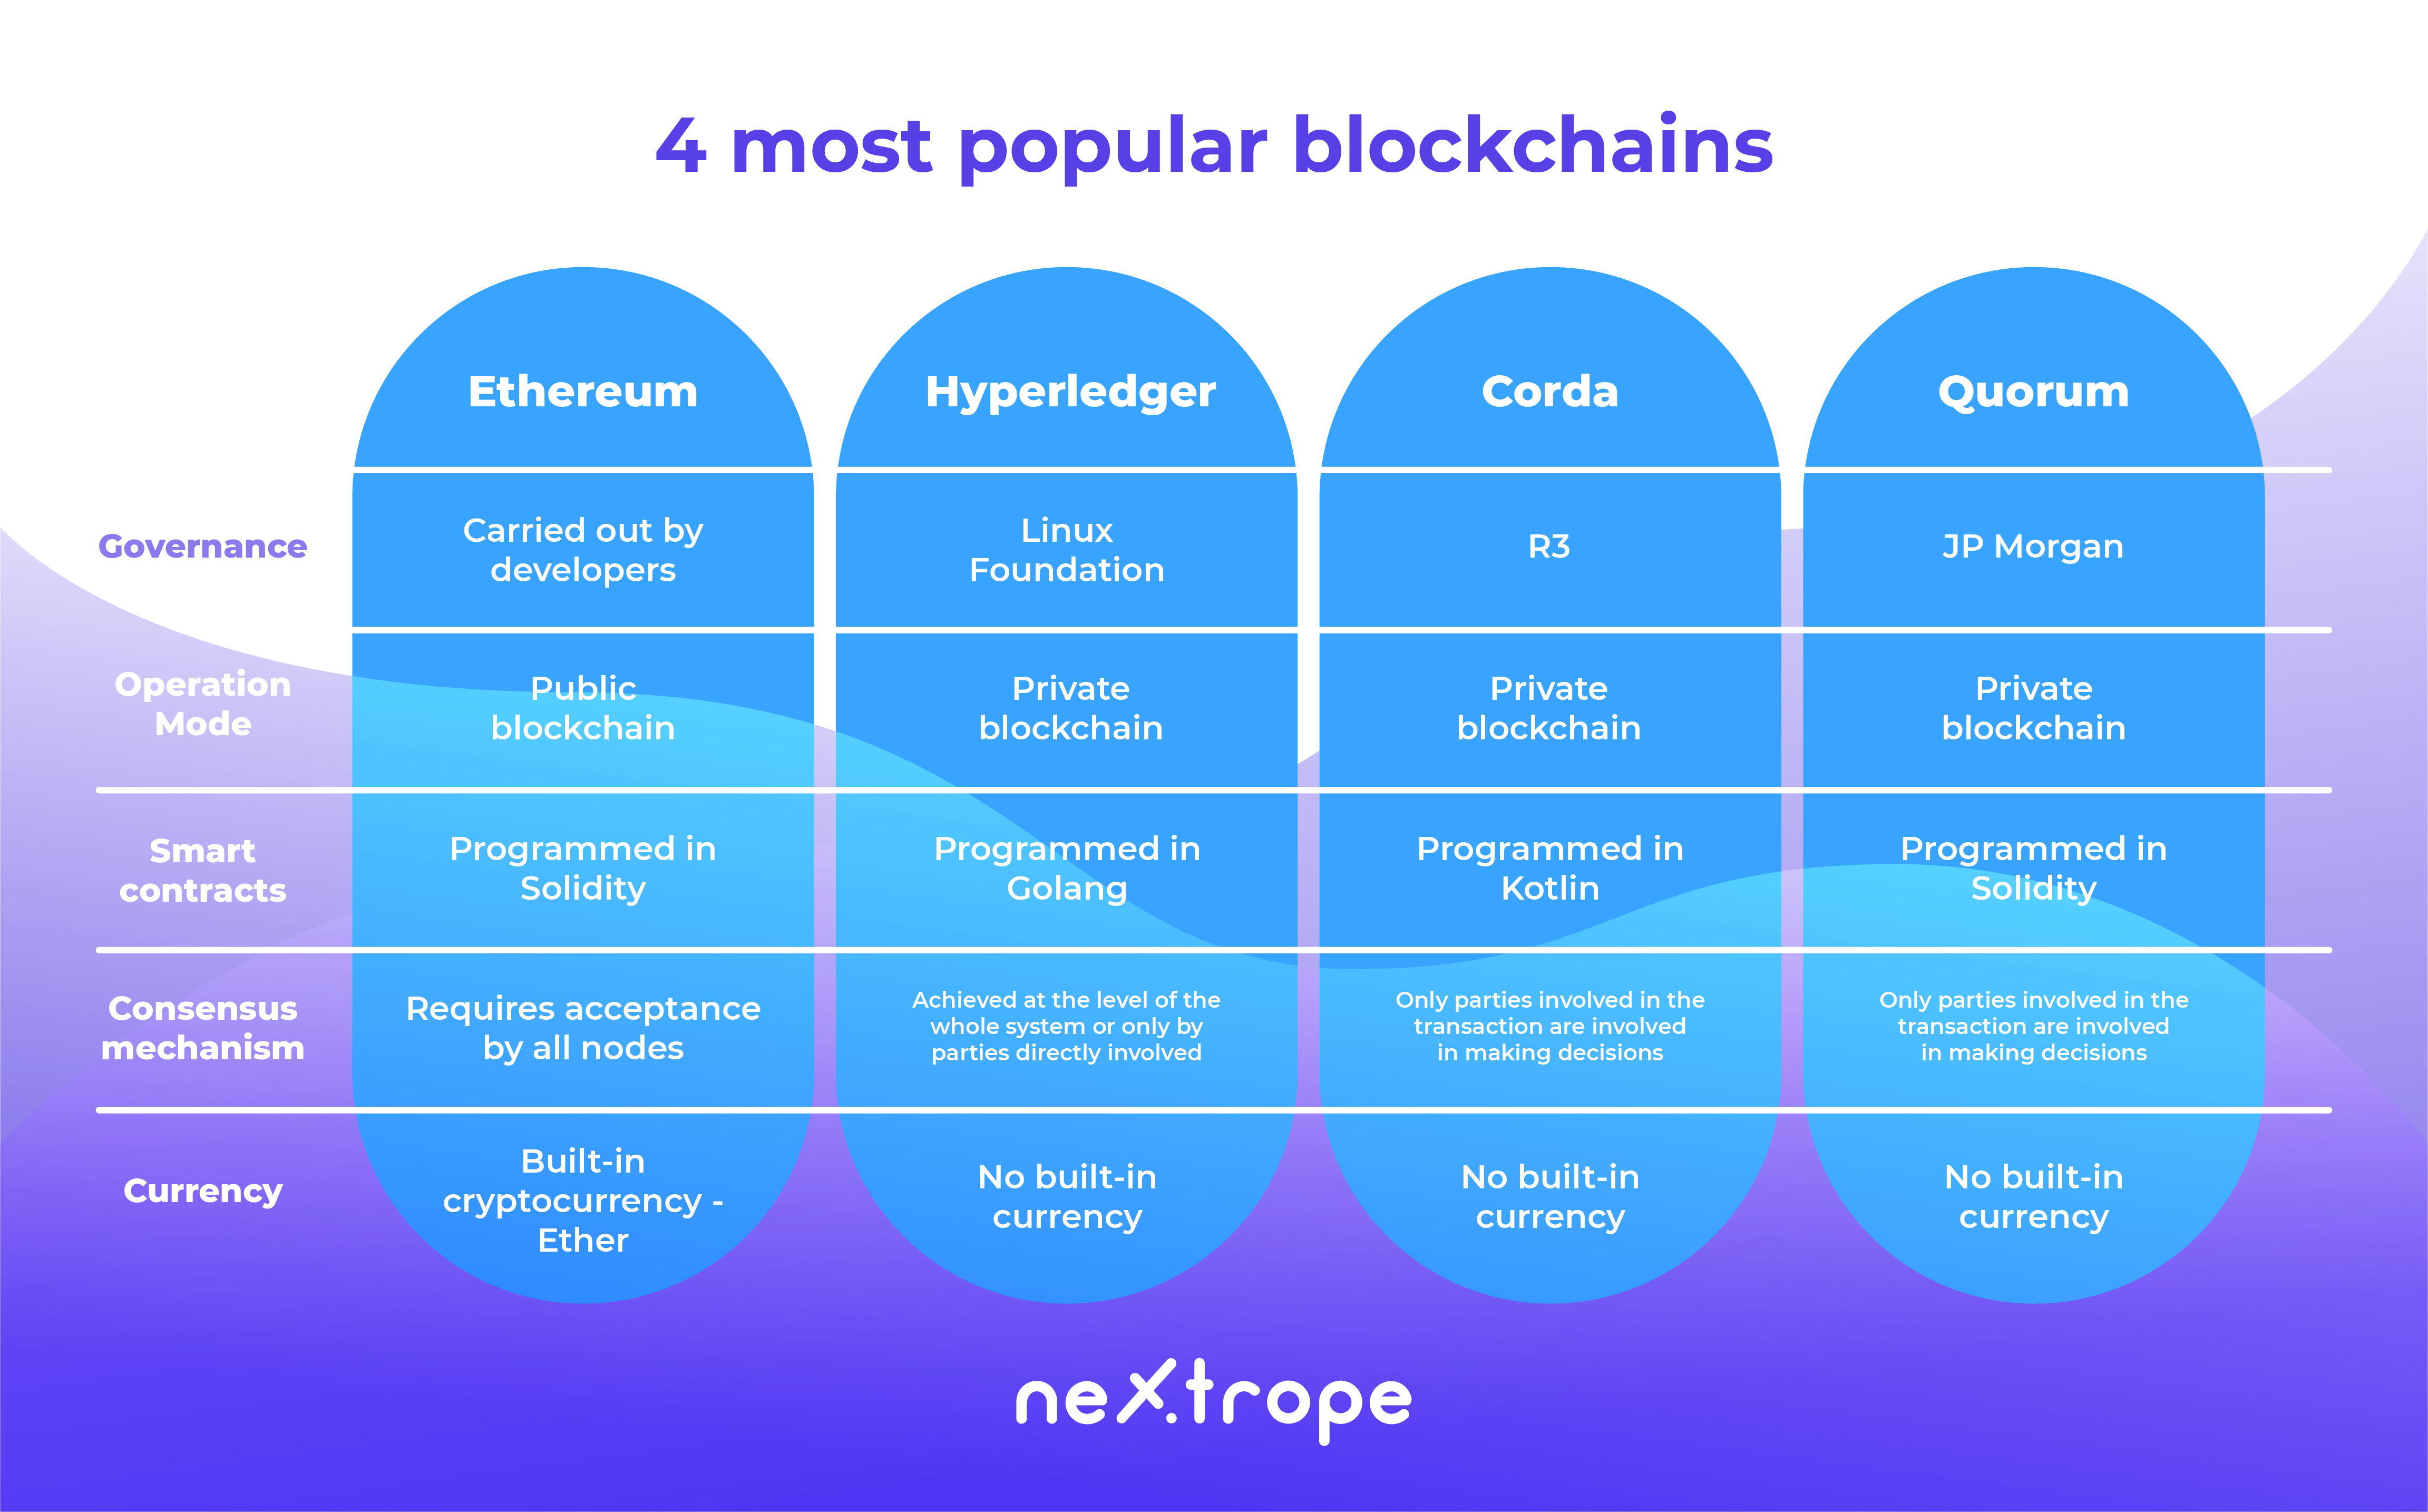 4 most popular blockchains -analysis and comparison of Ethereum, Hyperledger Fabric, Corda and Quorum